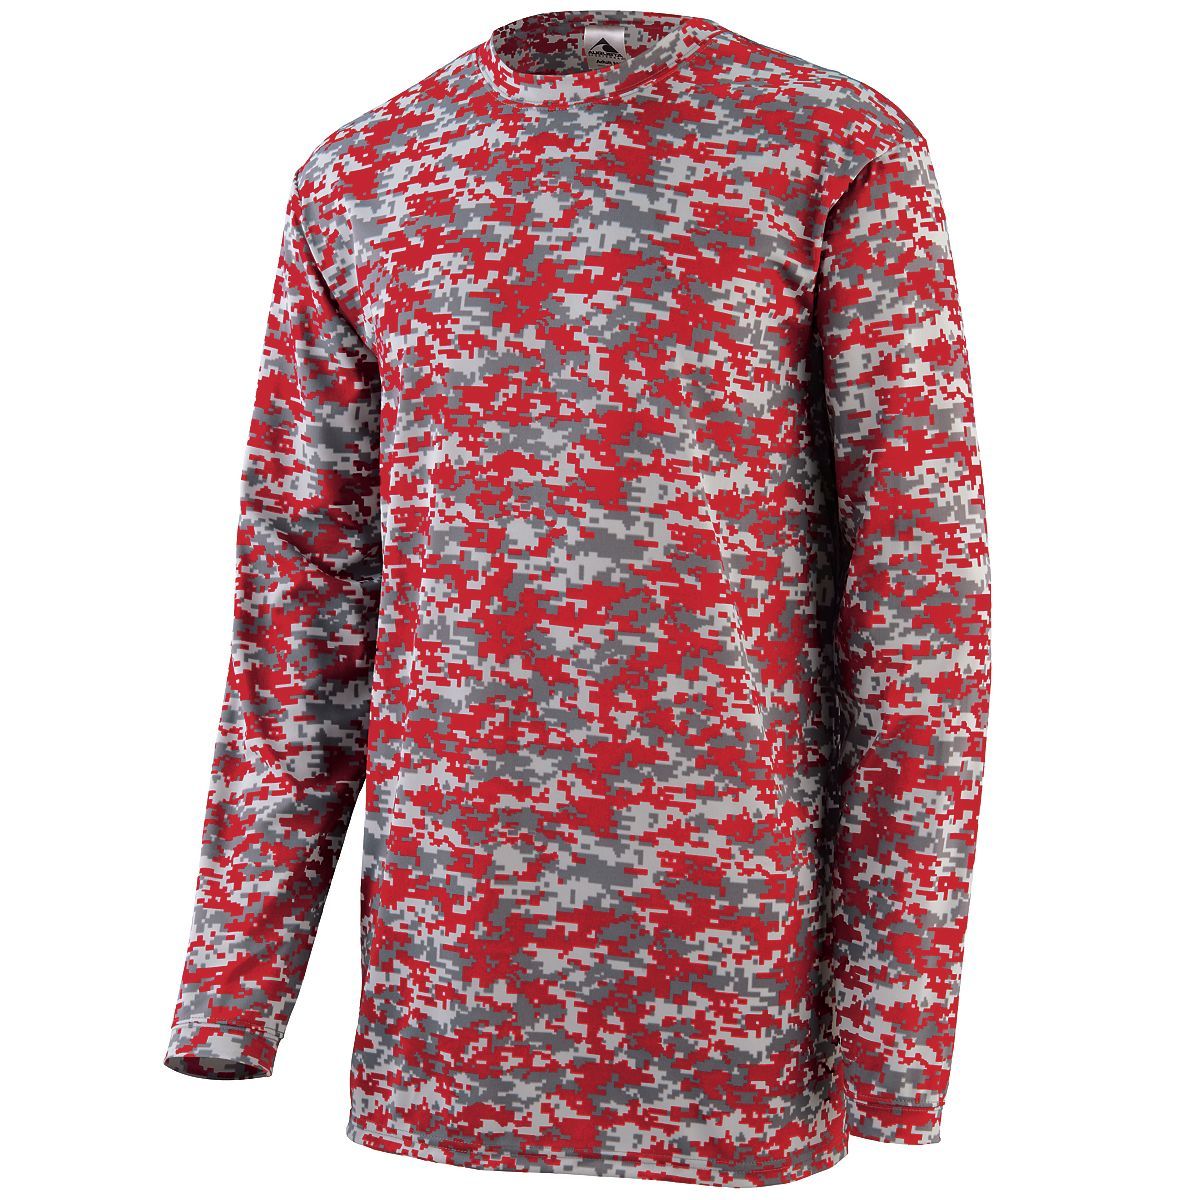 Augusta Sportswear Youth Digi Camo Wicking Long Sleeve T-Shirt in Red Digi  -Part of the Youth, Youth-Tee-Shirt, T-Shirts, Augusta-Products, Shirts product lines at KanaleyCreations.com